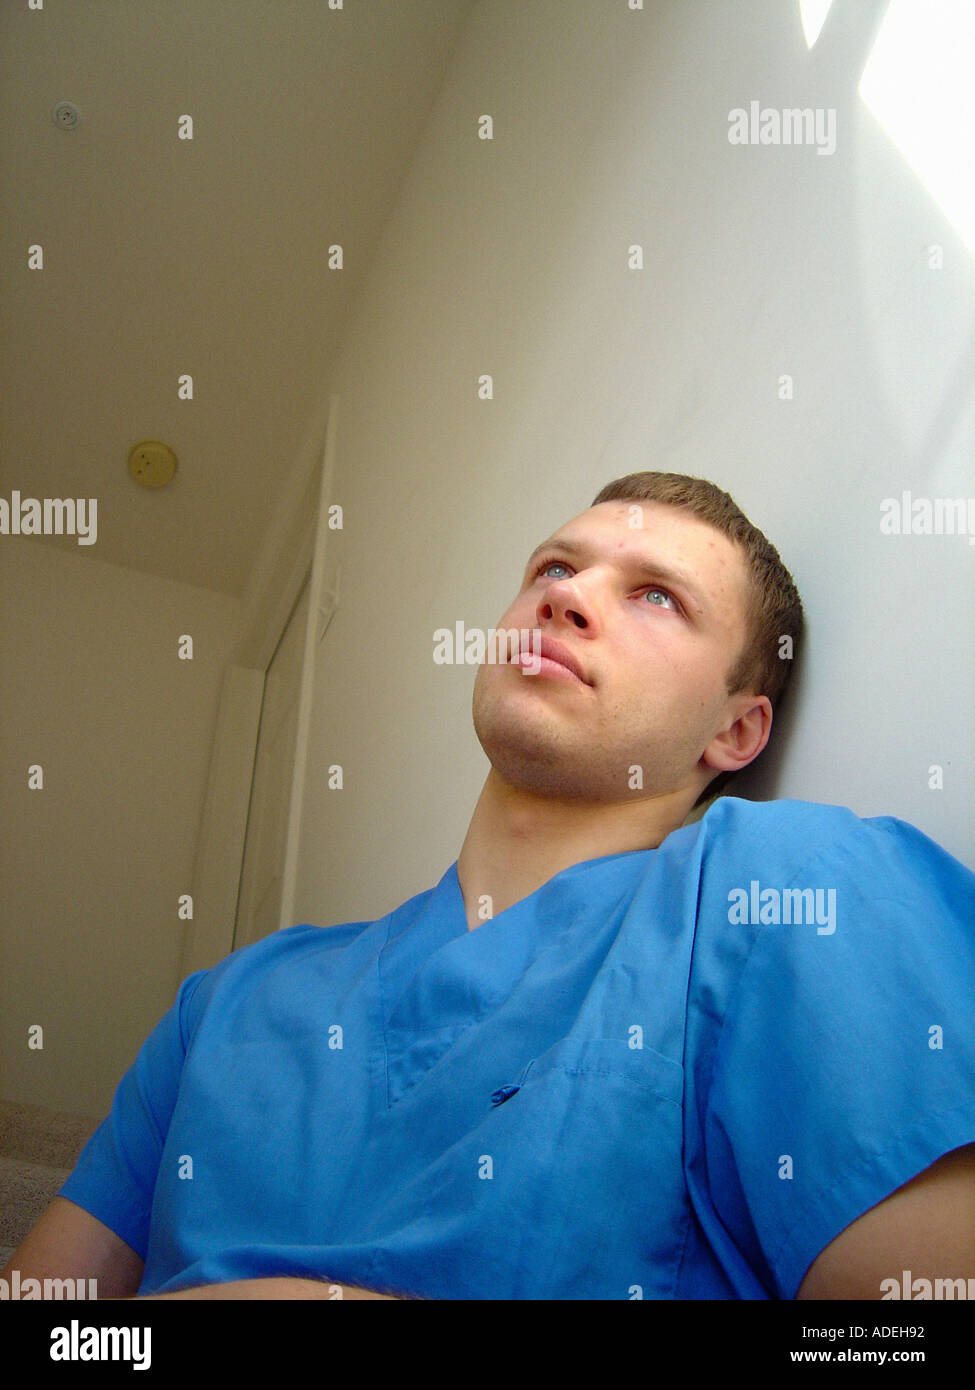 Portrait of a Male Doctor Medical Professional of Eastern European Ethnicity Wearing Blue Surgical Scrubs Stock Photo